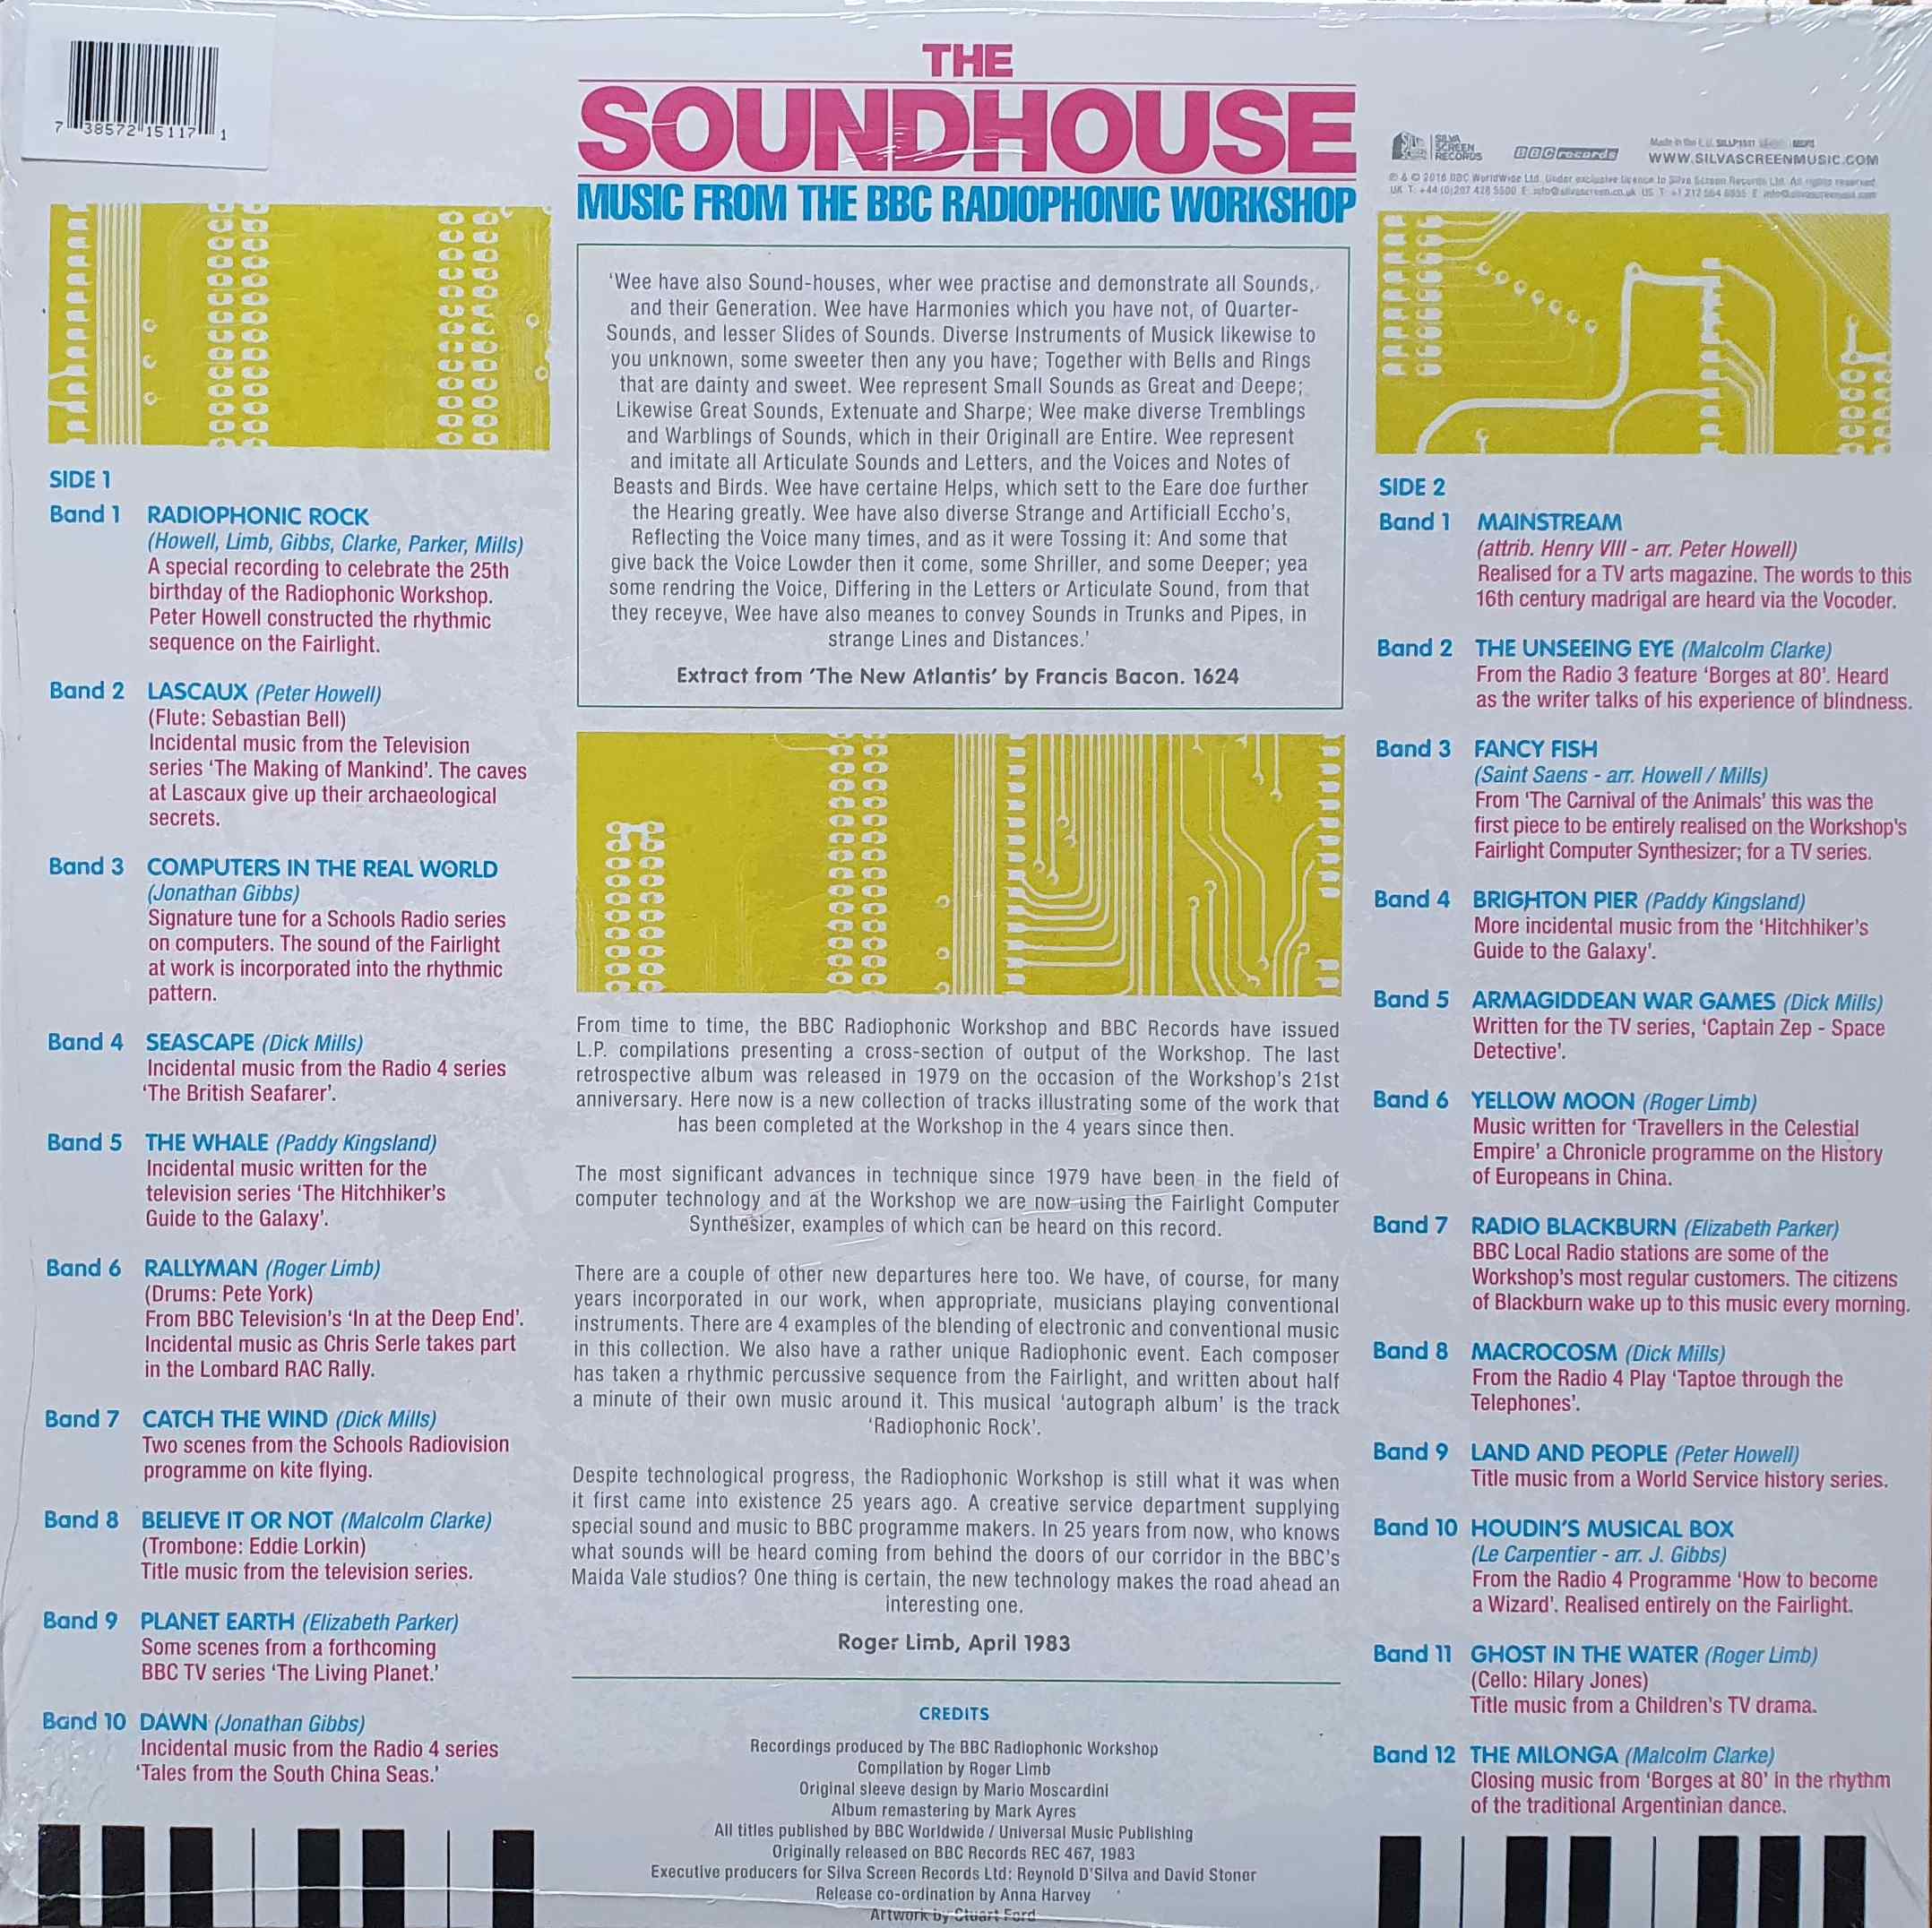 Picture of SILLP 1511 Soundhouse by artist Radiophonic Workshop from the BBC records and Tapes library